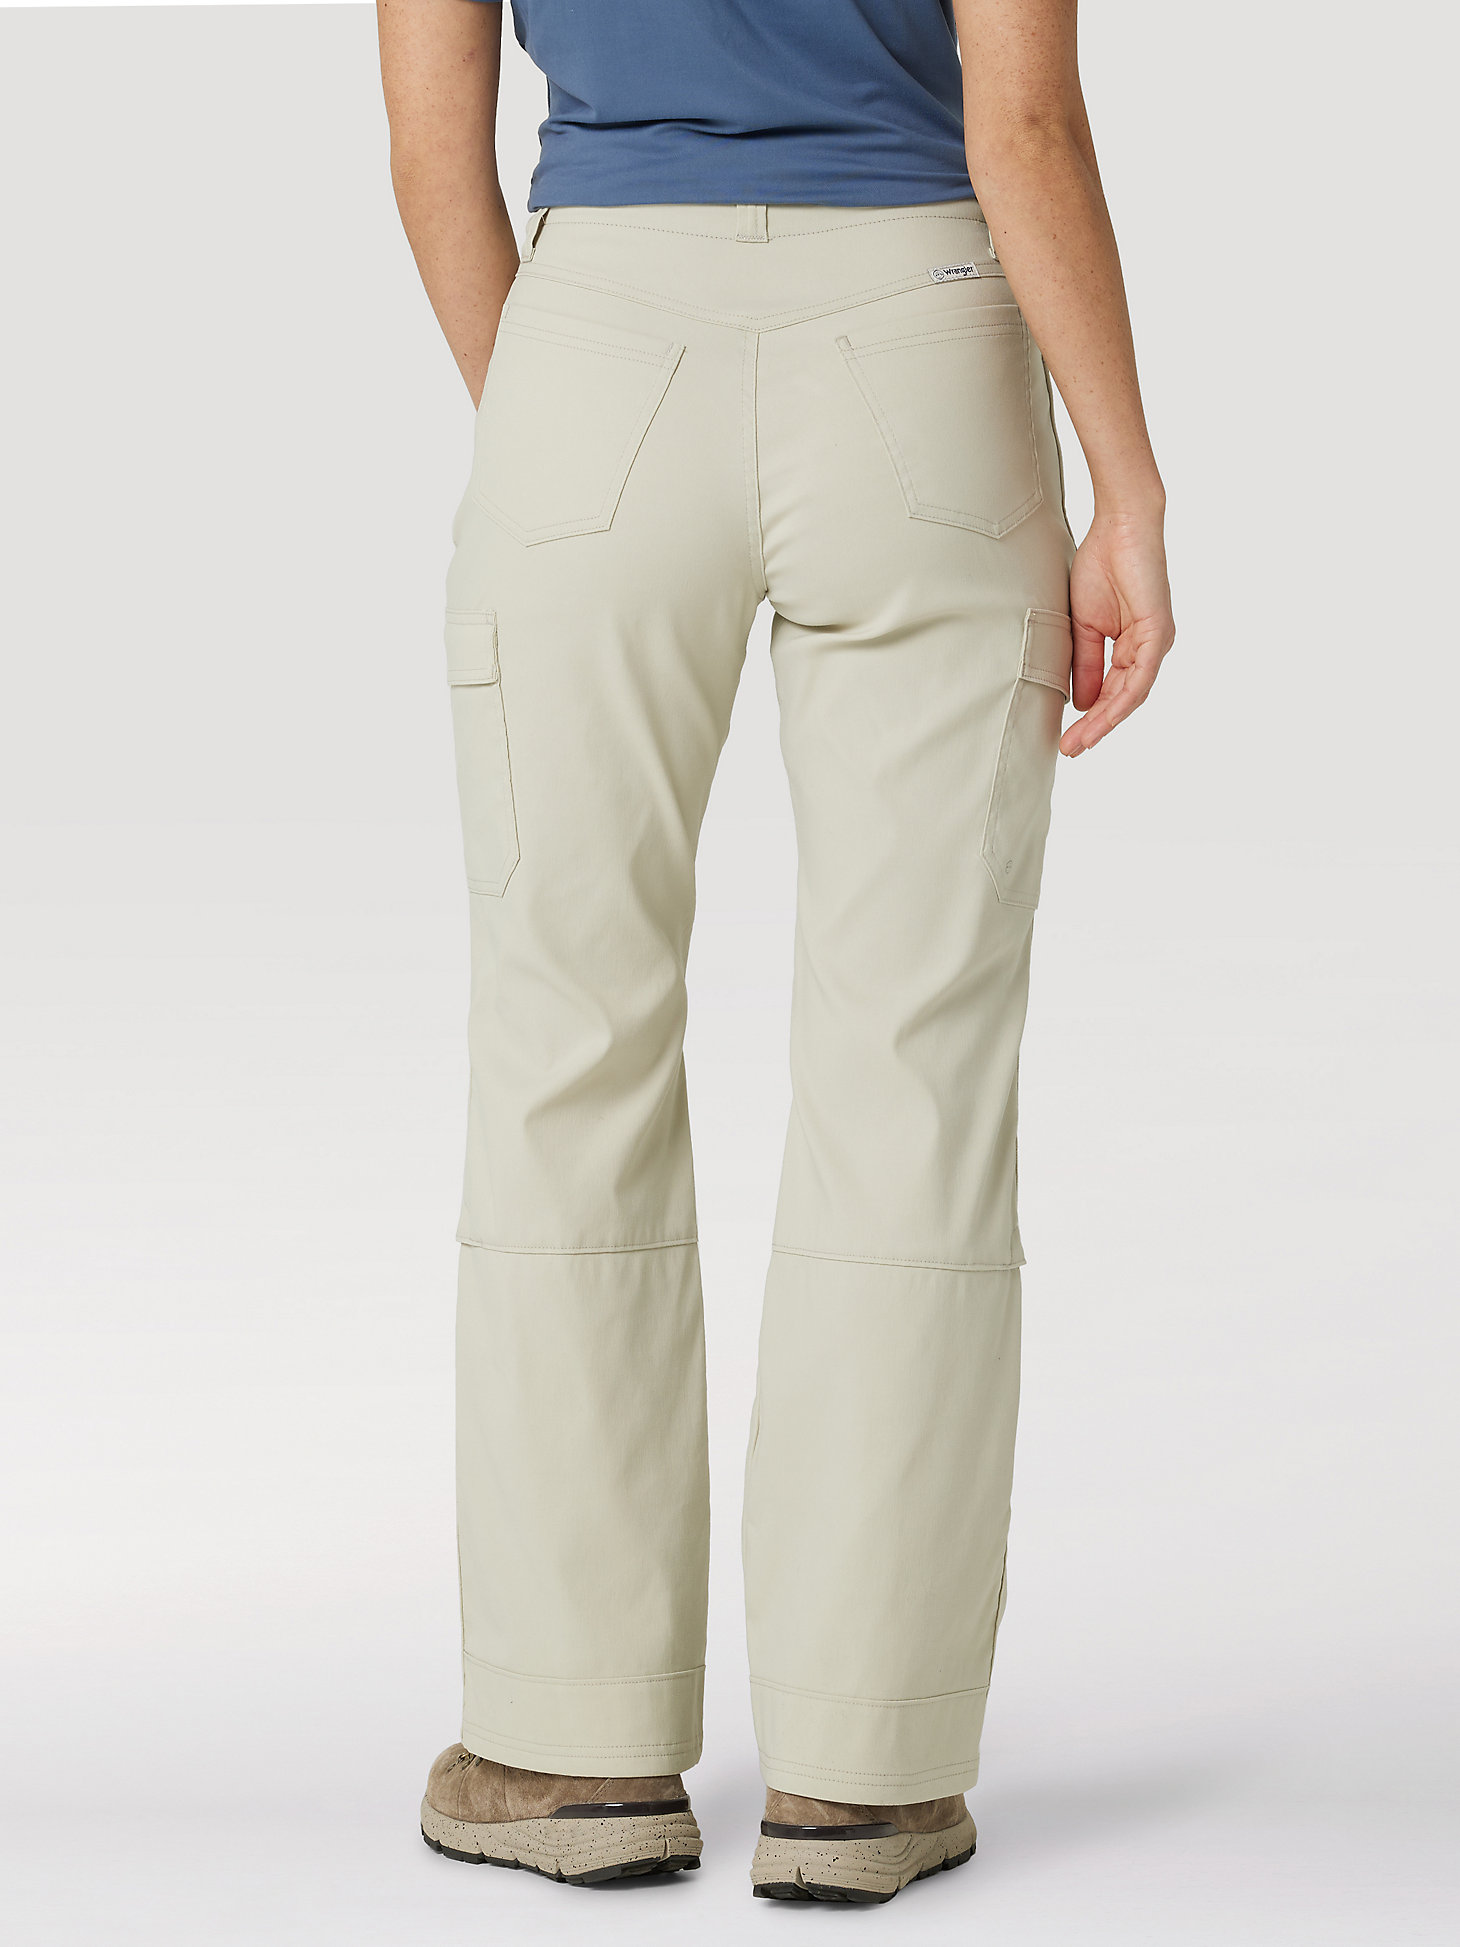 Cargo Bootcut Trousers in Pelican alternative view 2